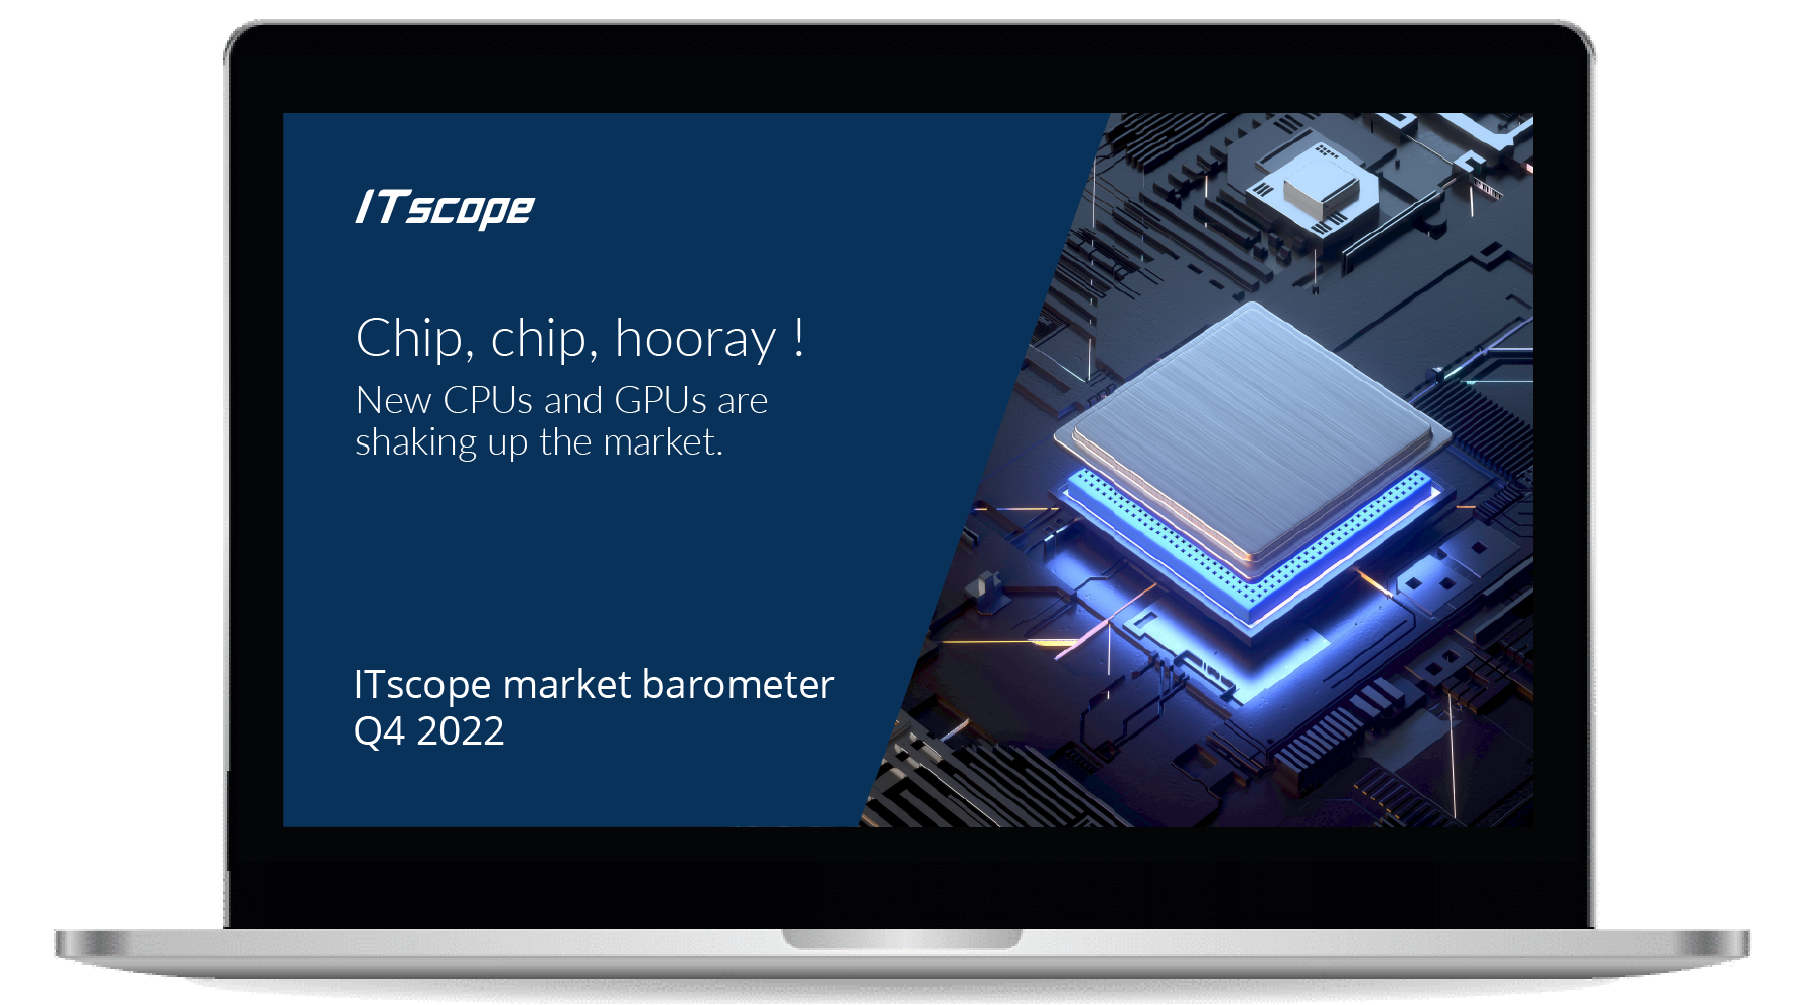 Chip, chip, hooray! New CPUs and GPUs are shaking up the market: ITscope market barometer Q4 2022